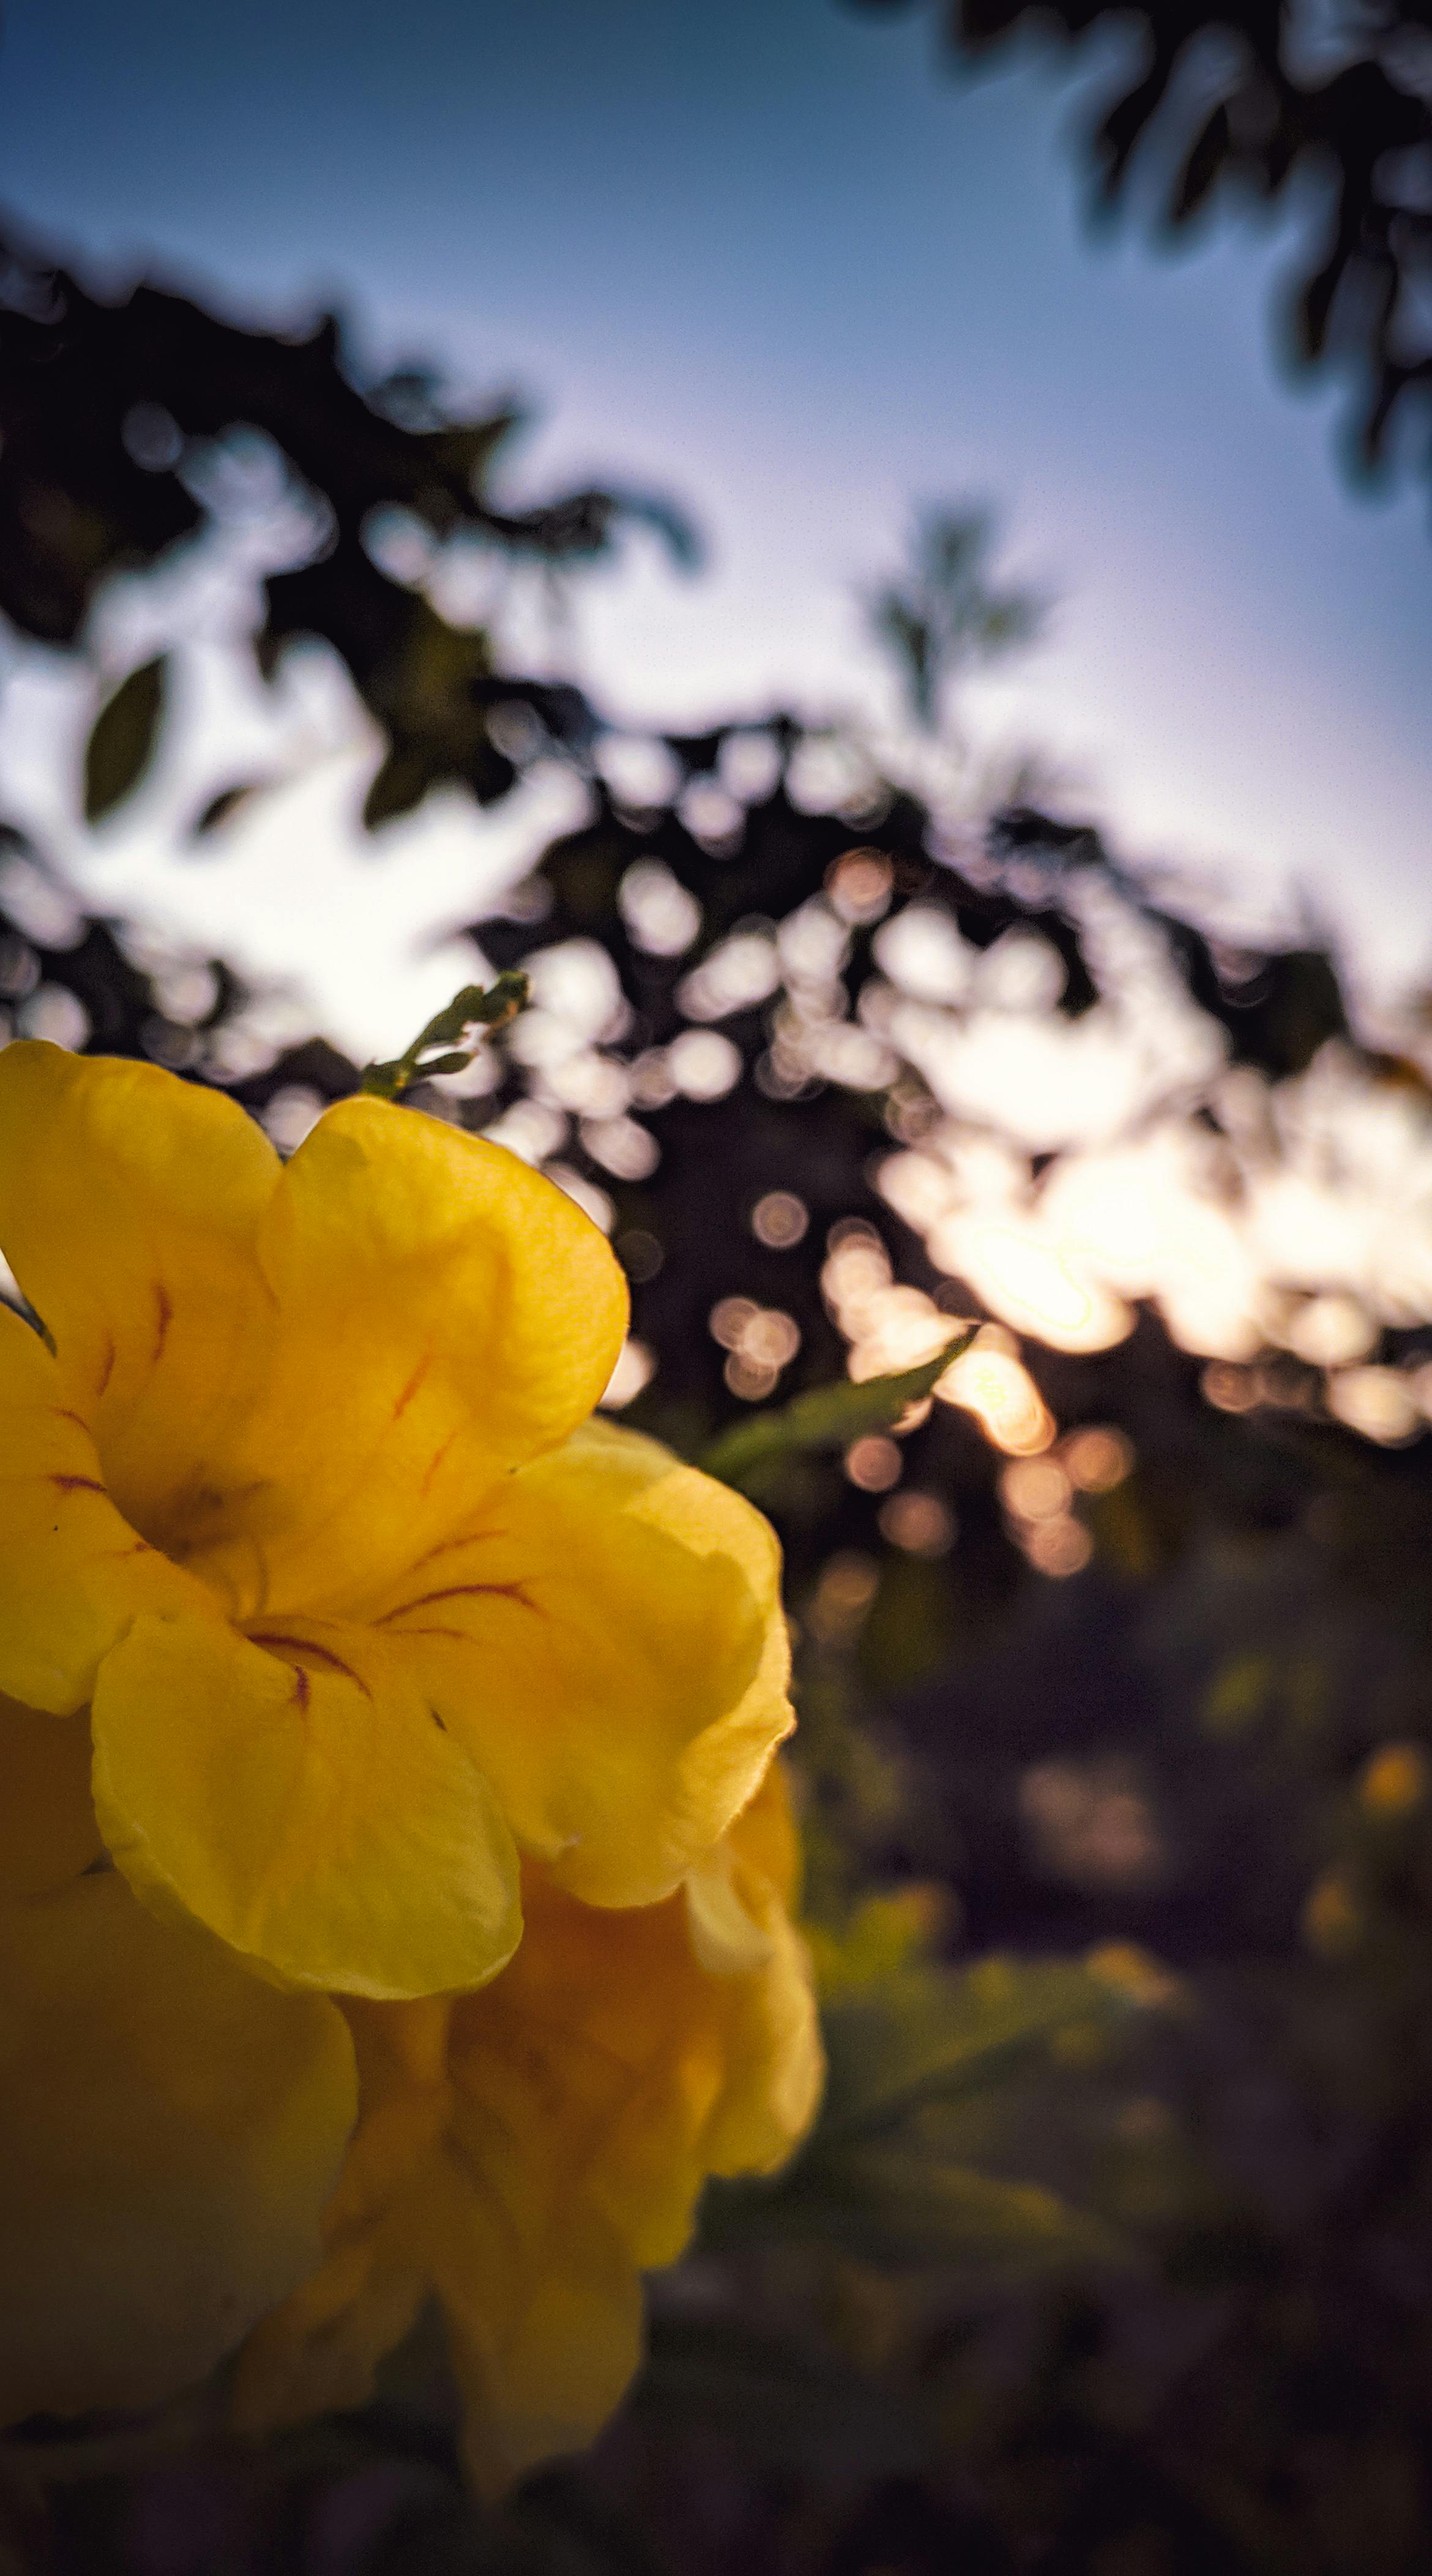 Free stock photo of blurred, early morning, morning flower